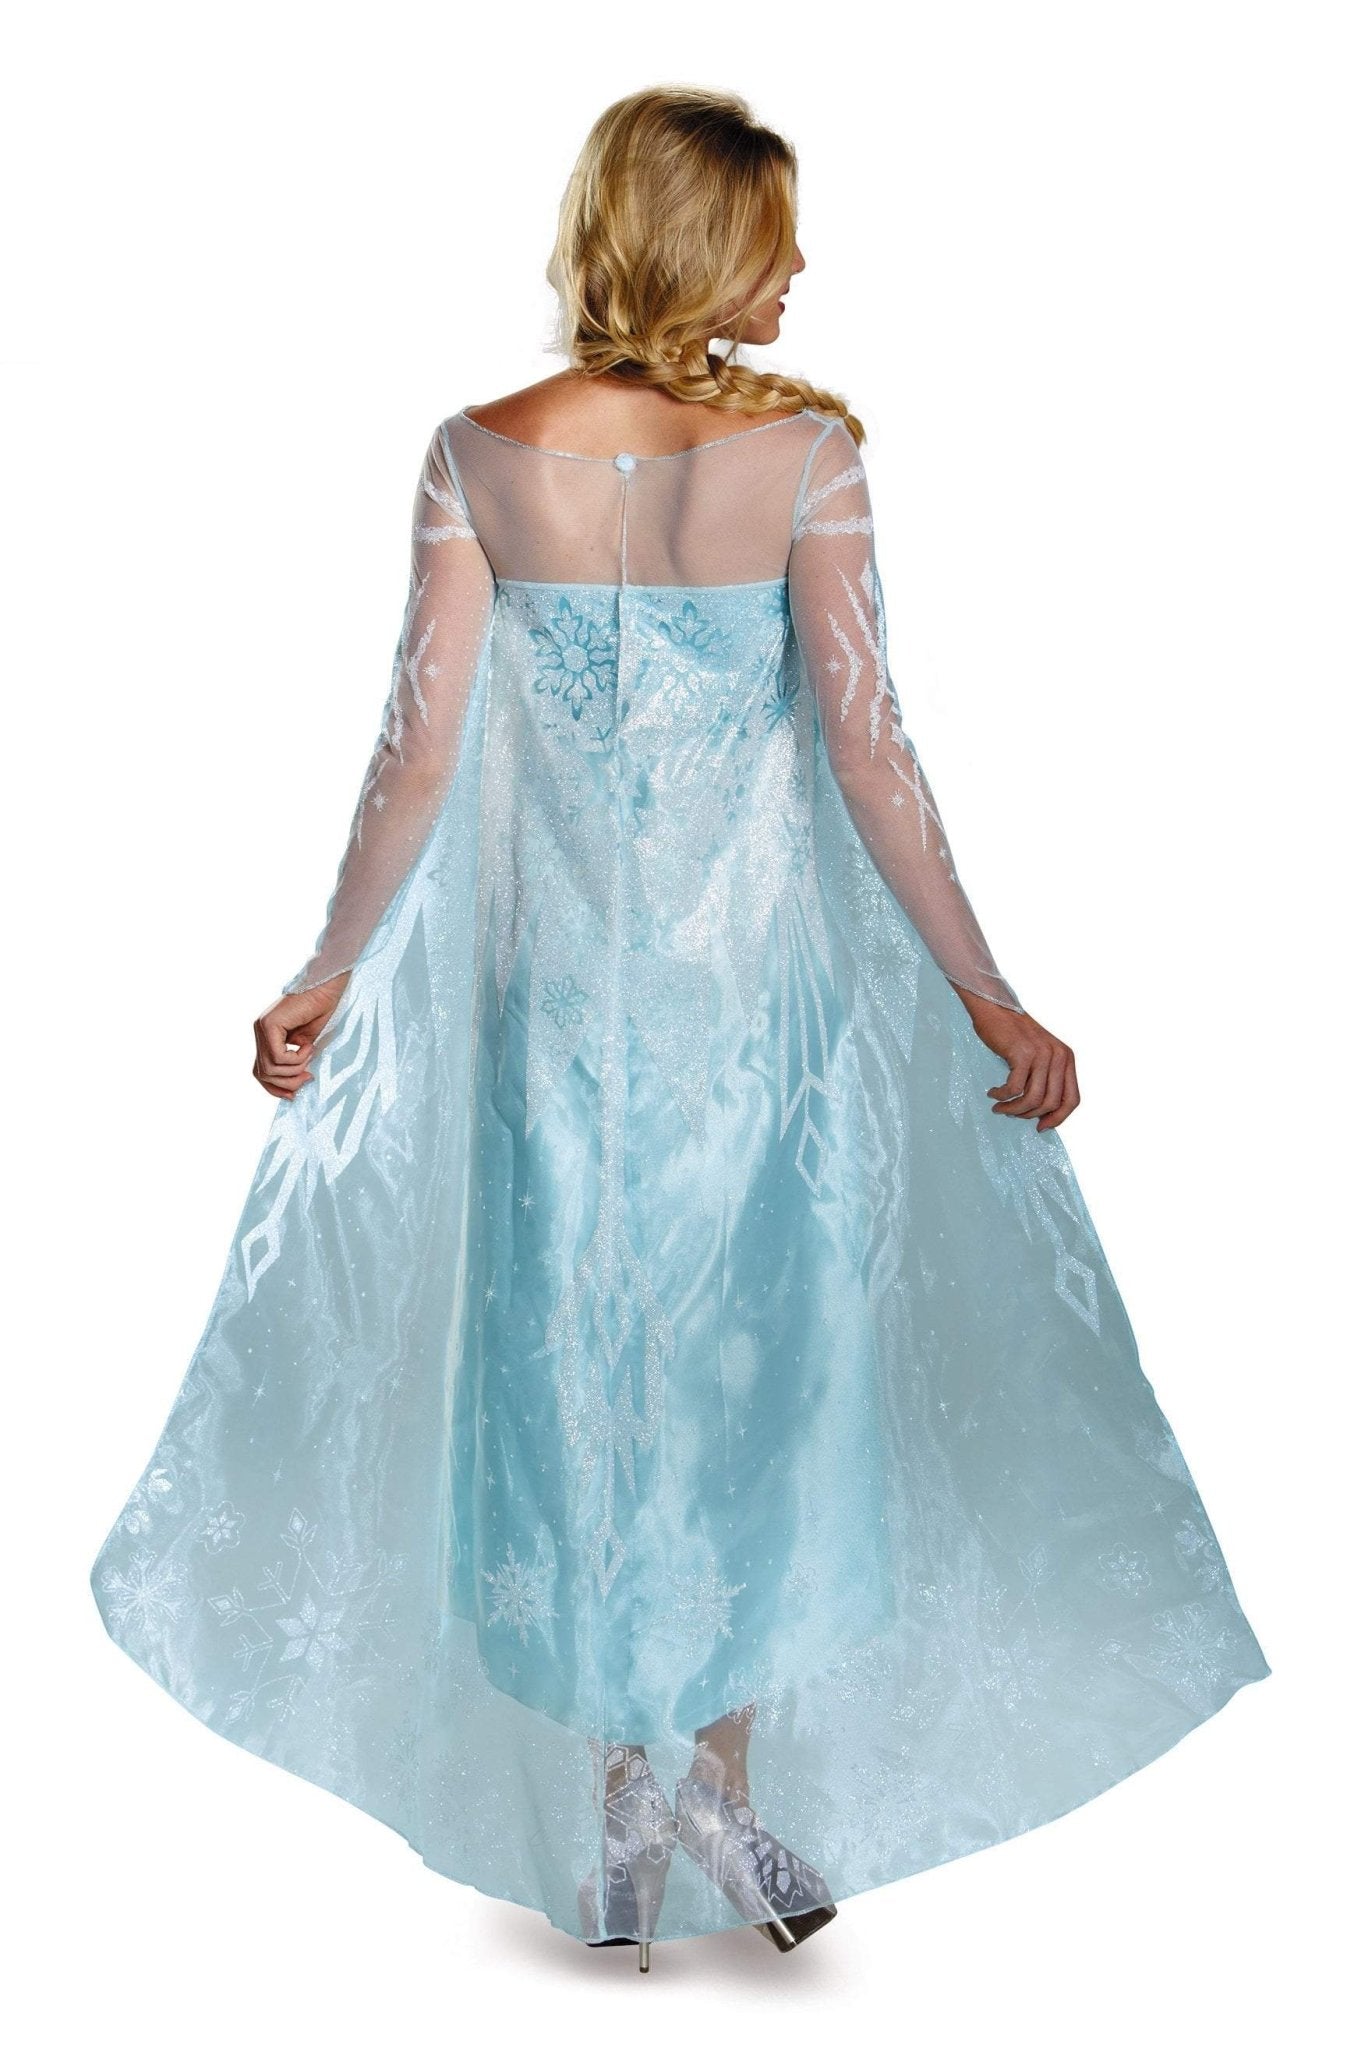 Elsa Adult Deluxe Costume DIS-82832 LARGE 12-14 - JJ's Party House